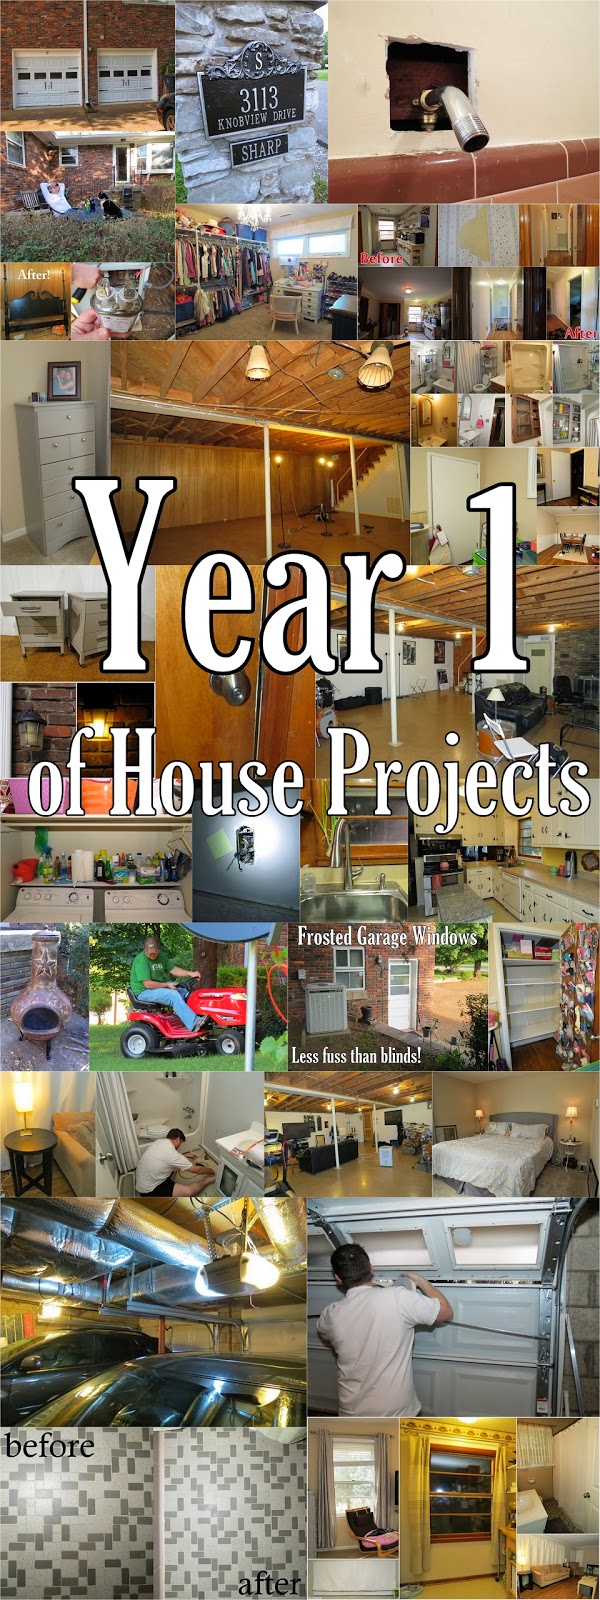 [year1-of-house-projects-hello-kirsti%255B5%255D.jpg]